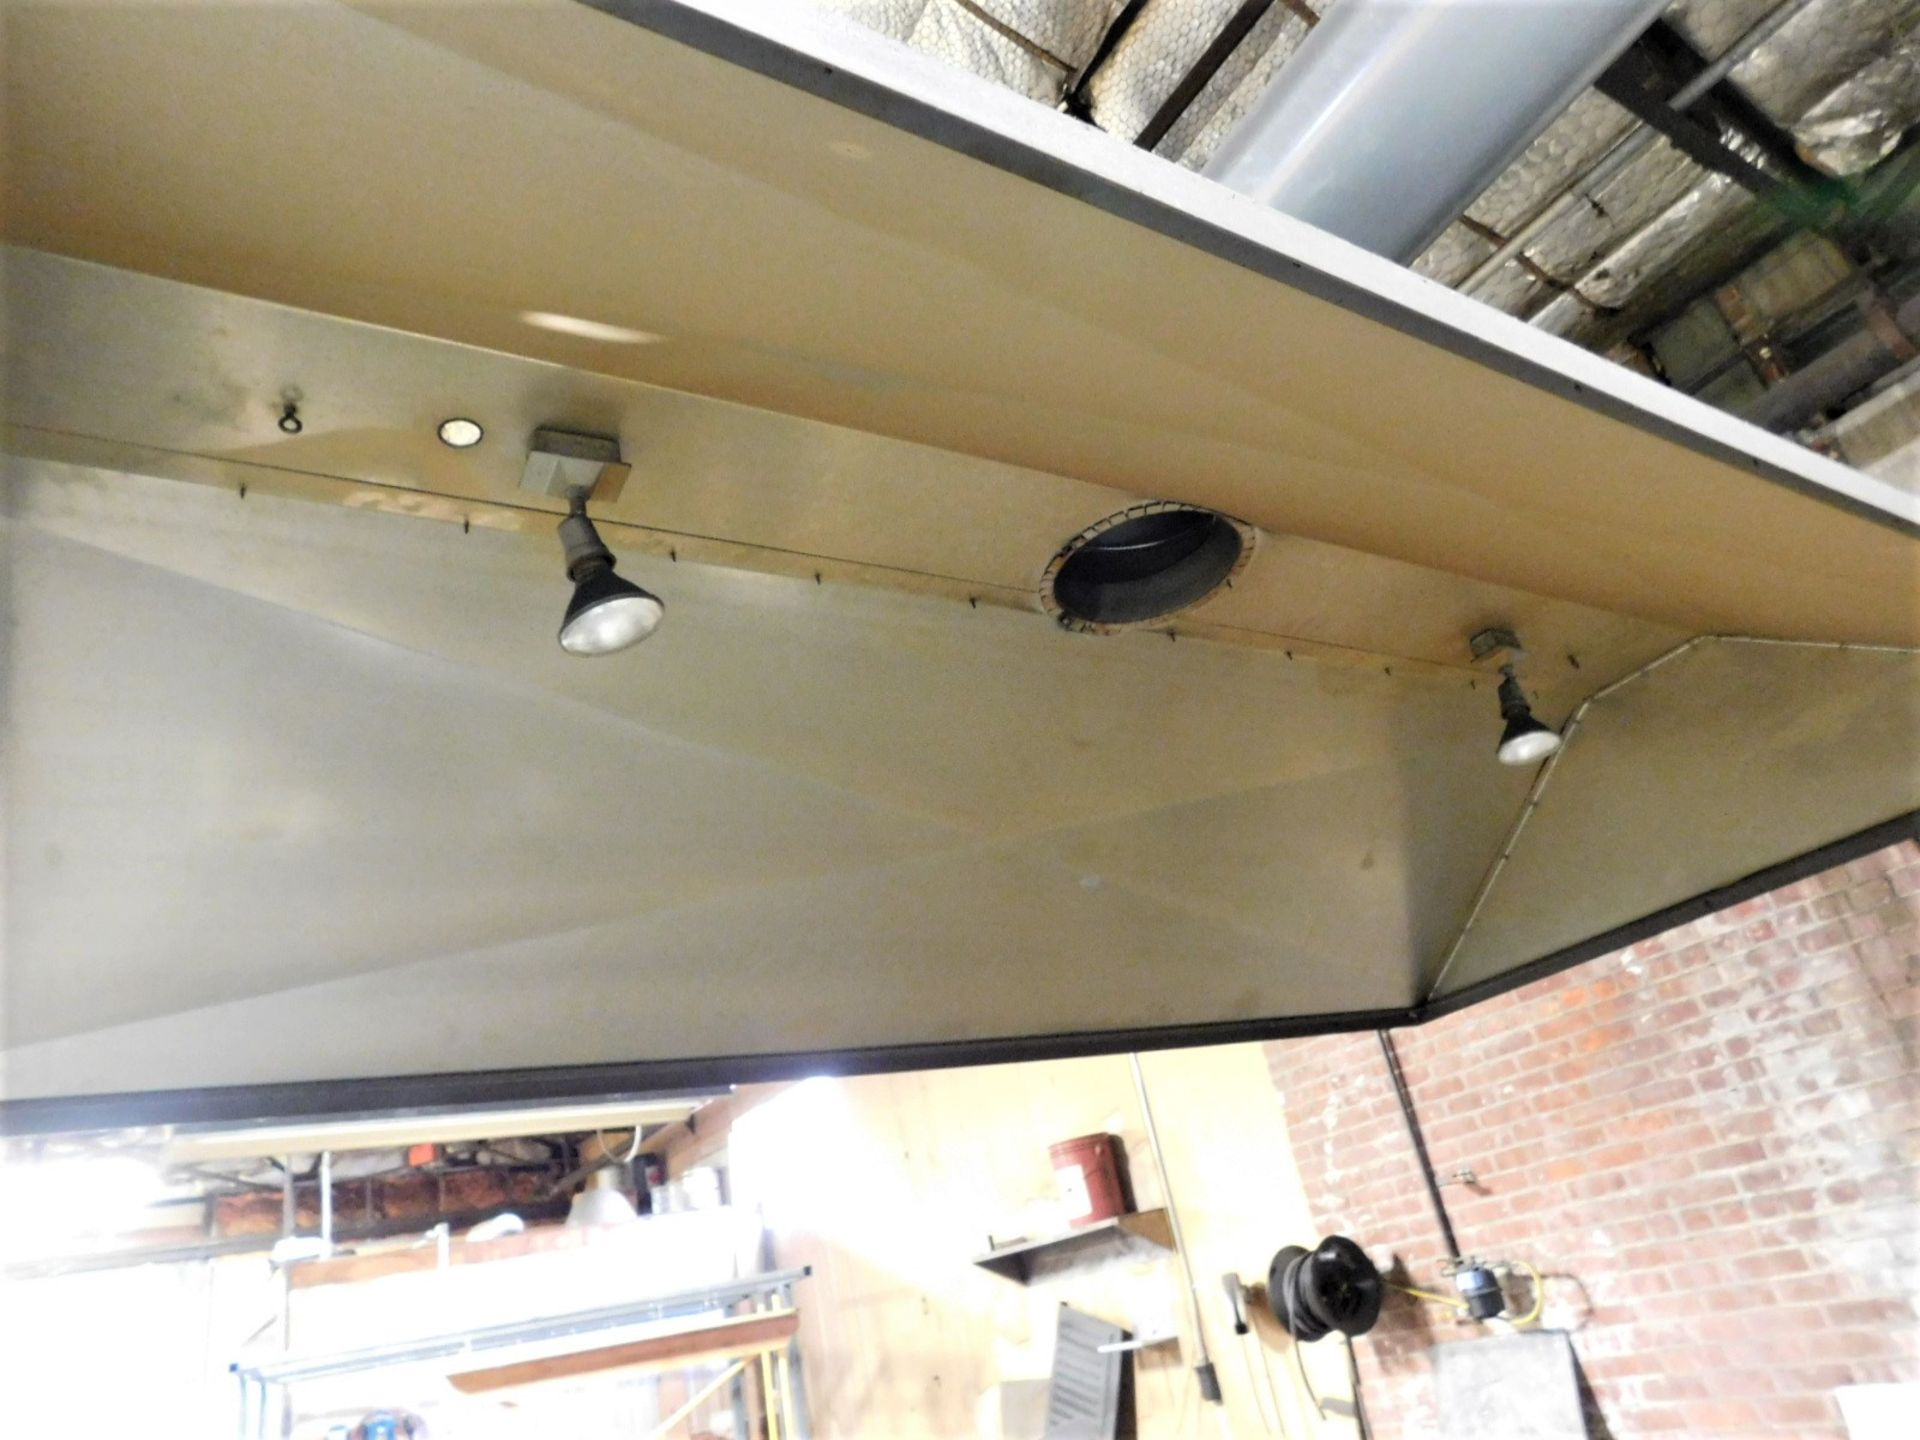 10' X 6' FUME HOOD W/ EXHAUST FAN AND DUCTING, GREAT FOR THE TRACK TORCH - Image 2 of 5